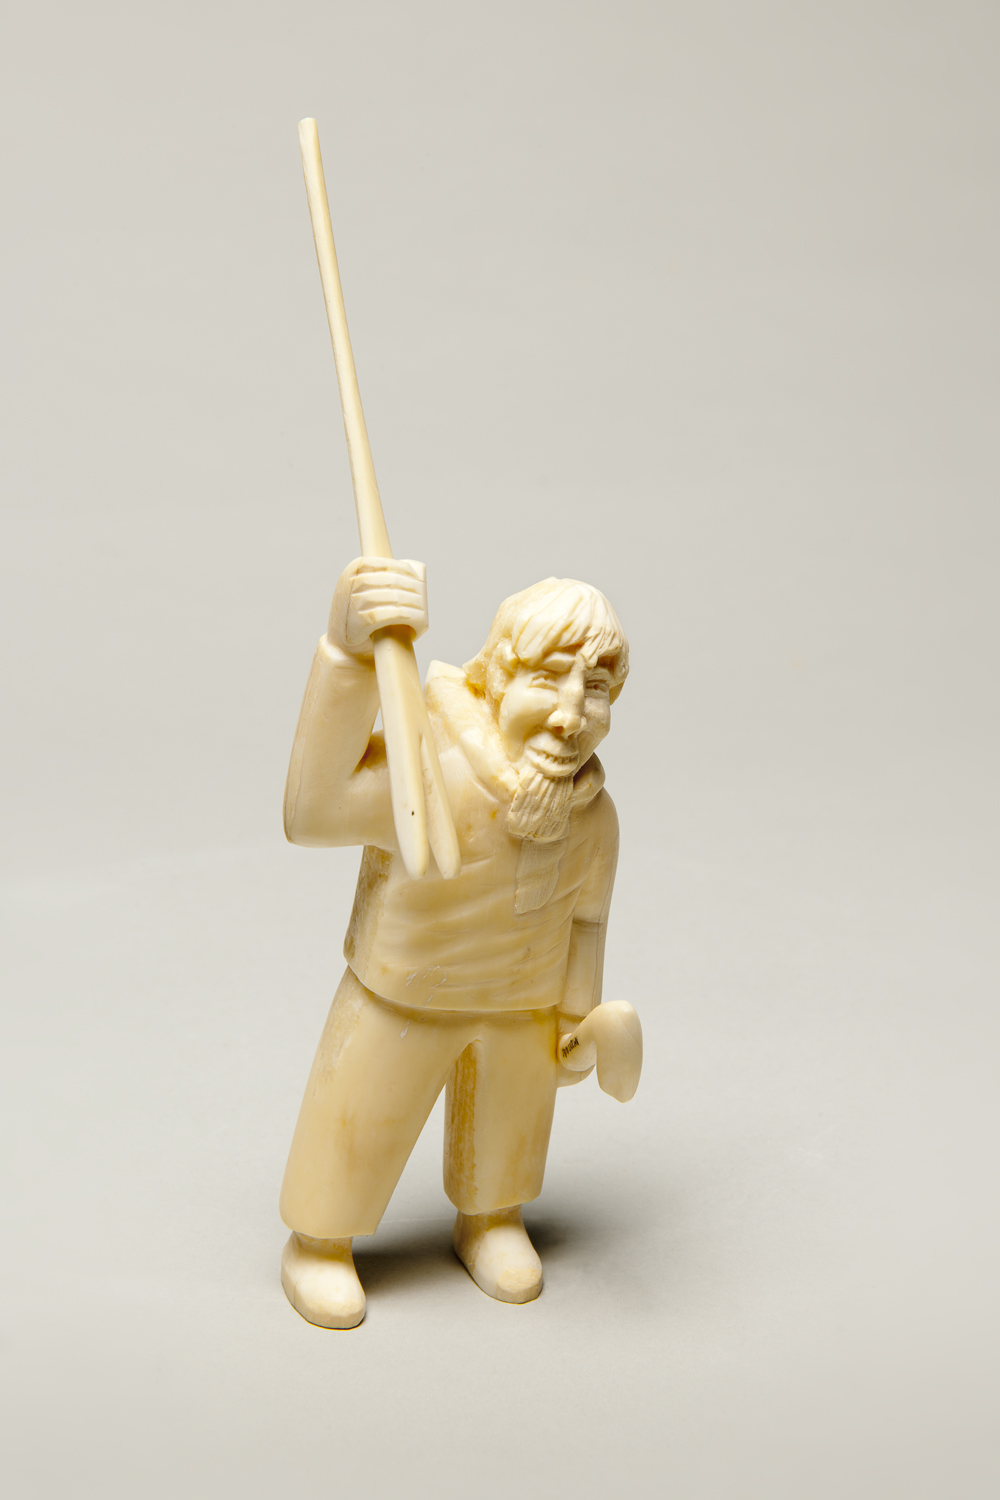 Man with hunting implement. Unidentified Inuit artist, Kangaamiut, ca. 1940. Ivory. Museum Purchase, in memory of Ankar Baregard. Photo by Dean Abramson.